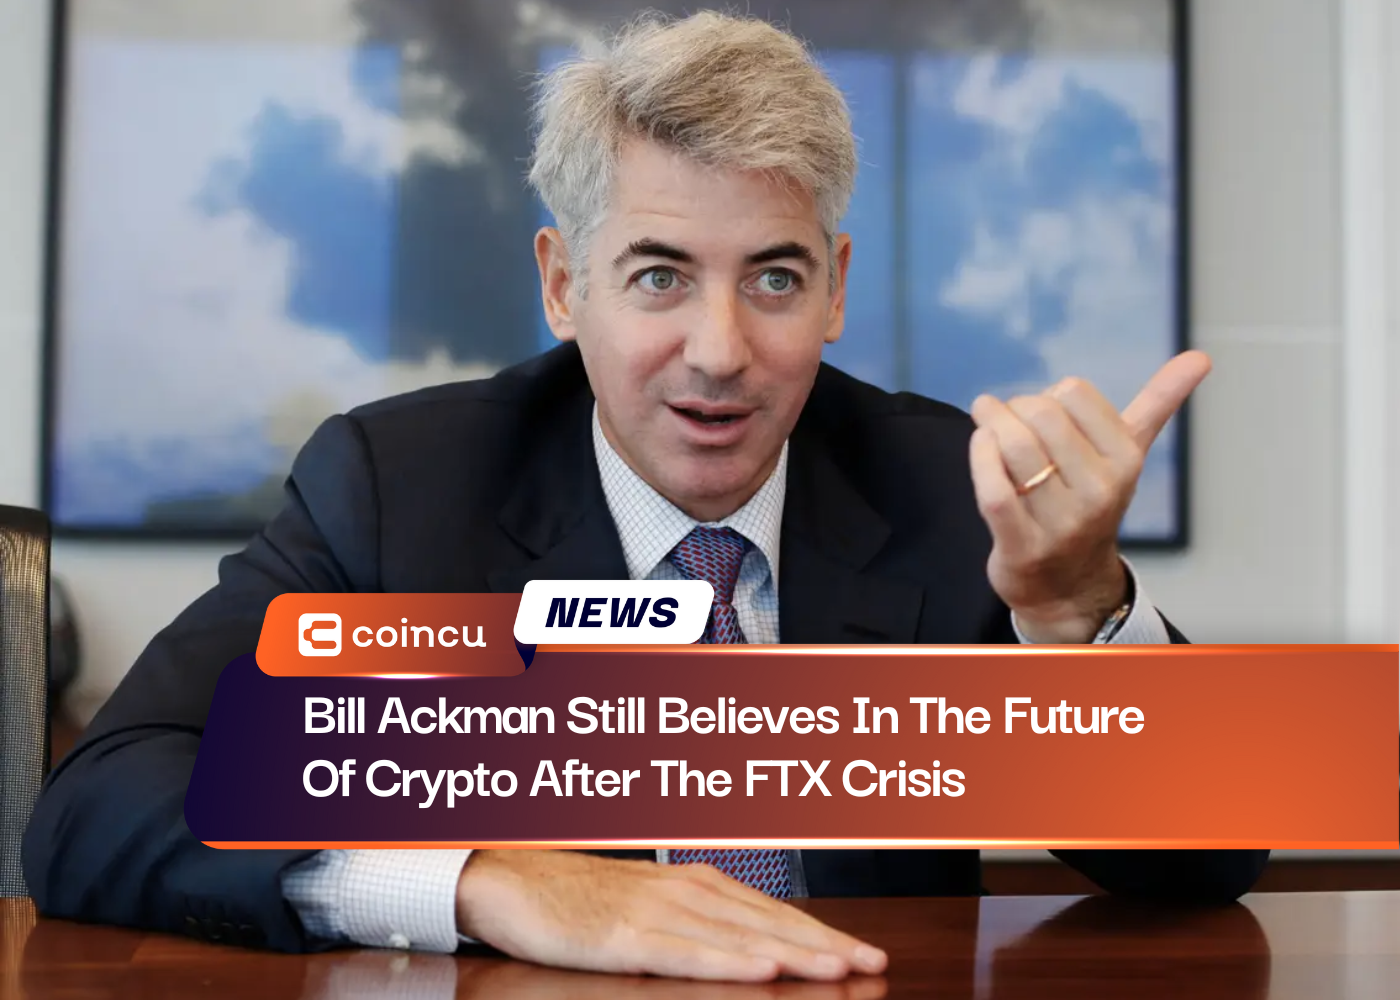 Bill Ackman Still Believes In The Future Of Crypto After The FTX Crisis